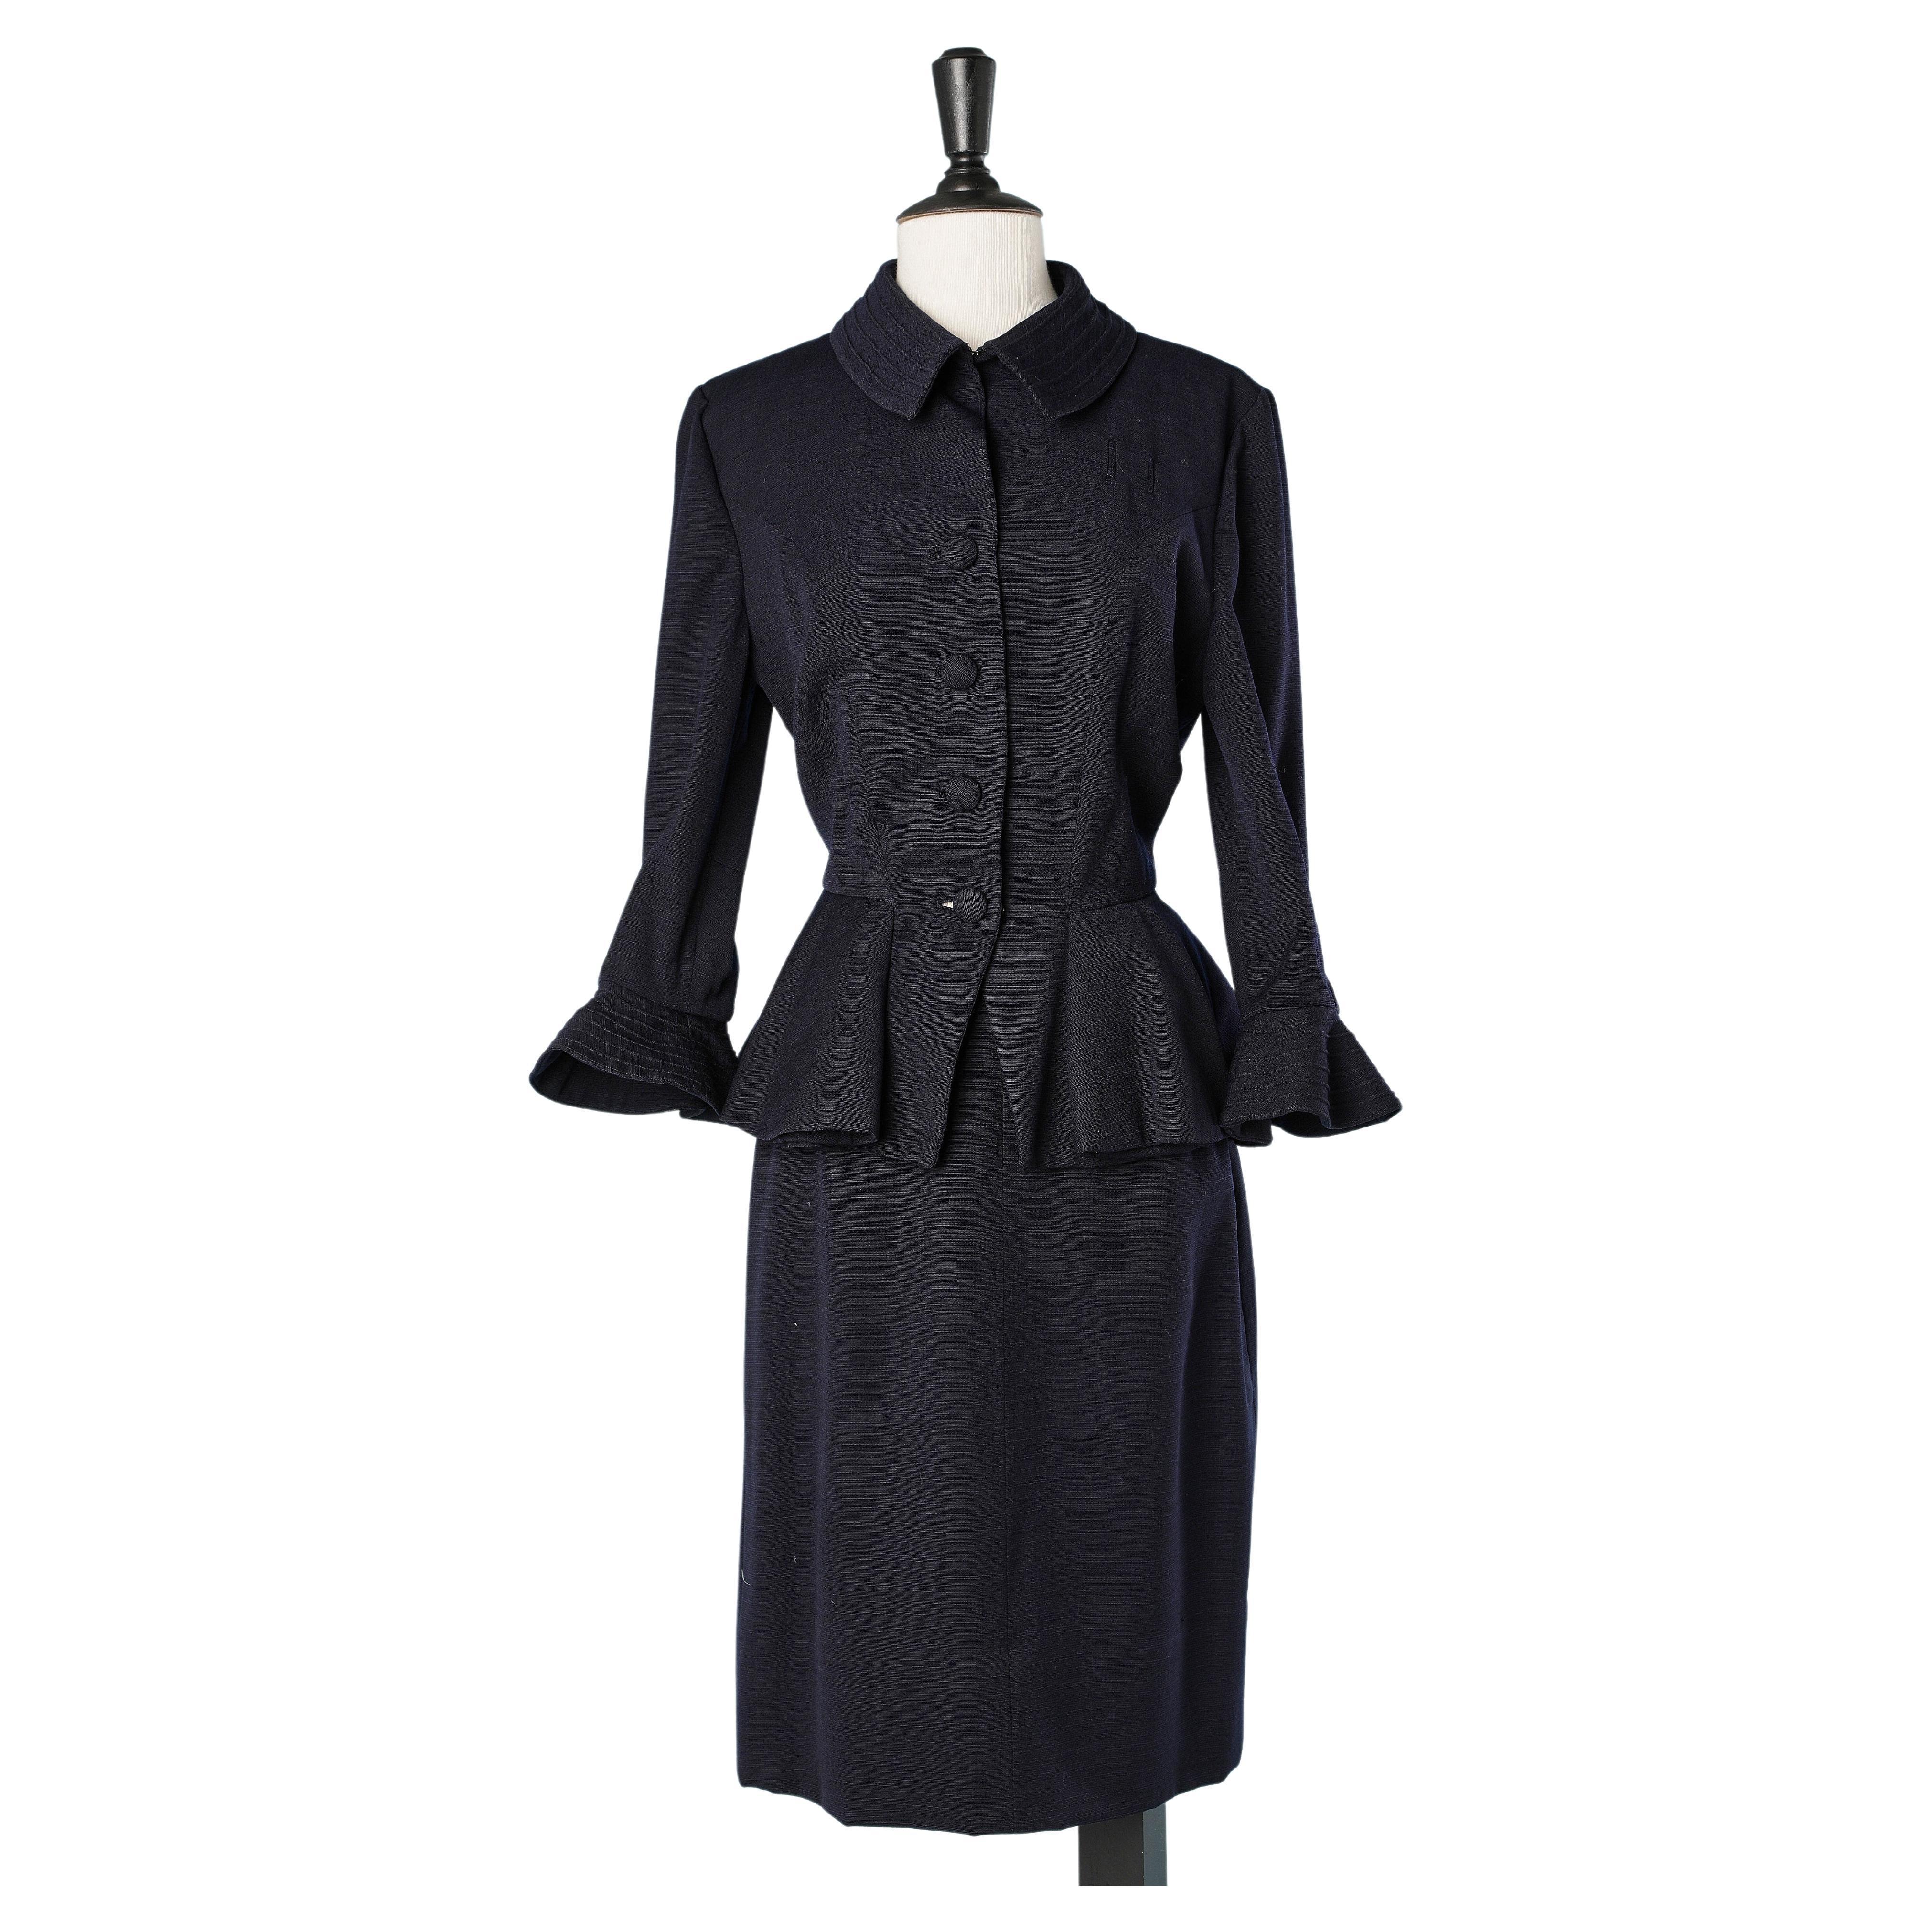 Navy blue wool skirt suit with top-stitching Lilli Ann Circa 1940 For Sale